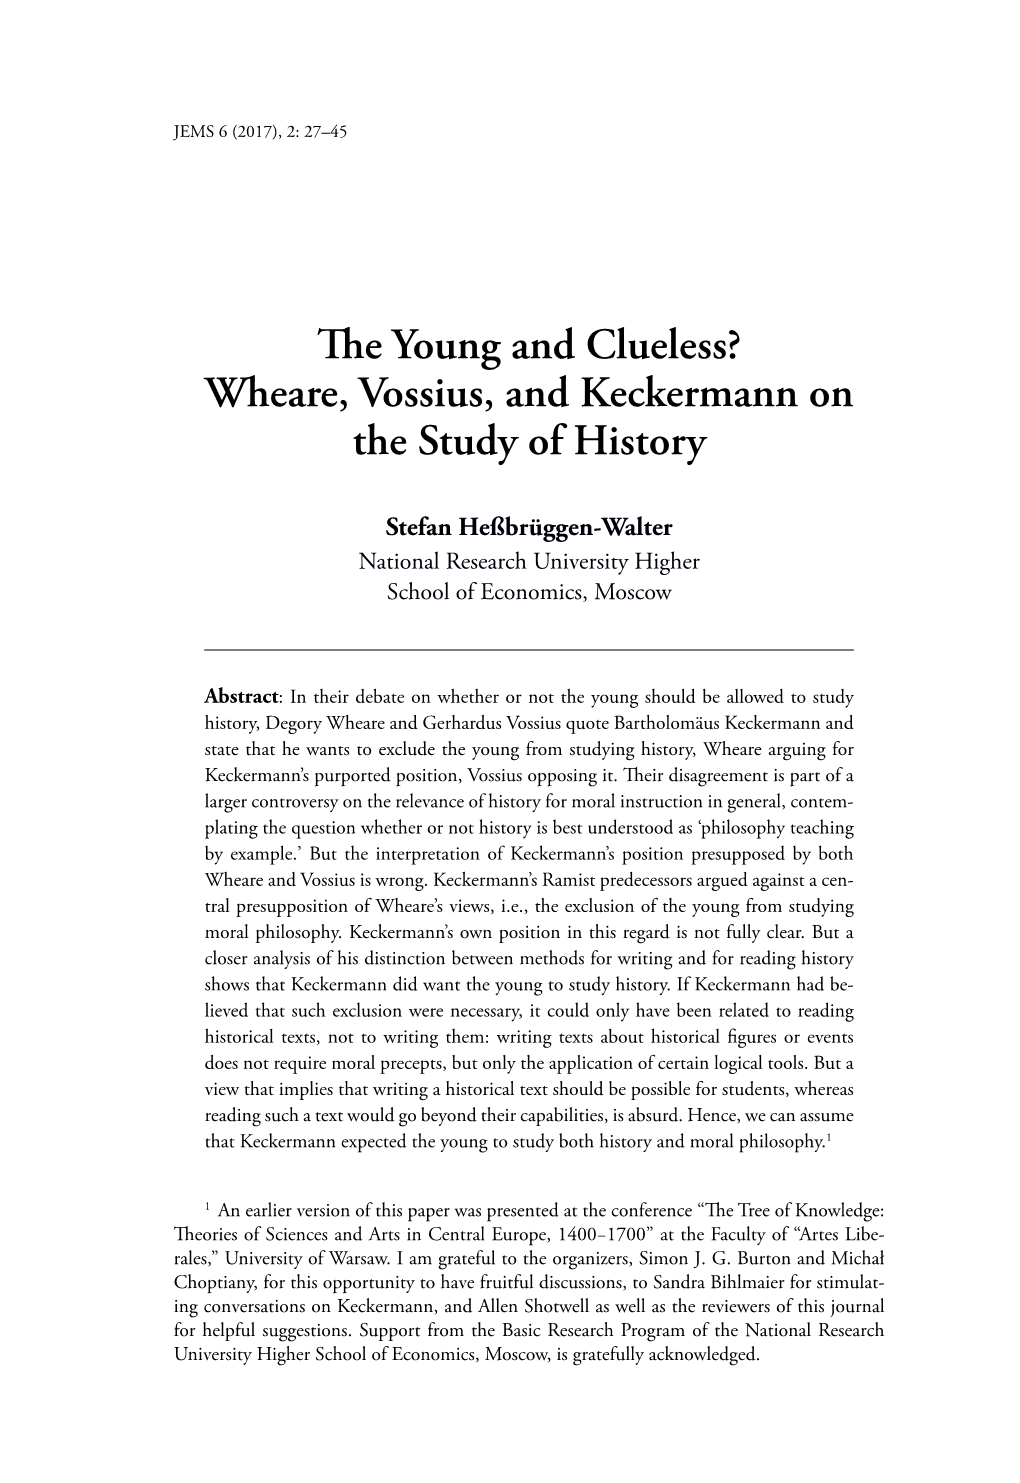 The Young and Clueless? Wheare, Vossius, and Keckermann on the Study of History